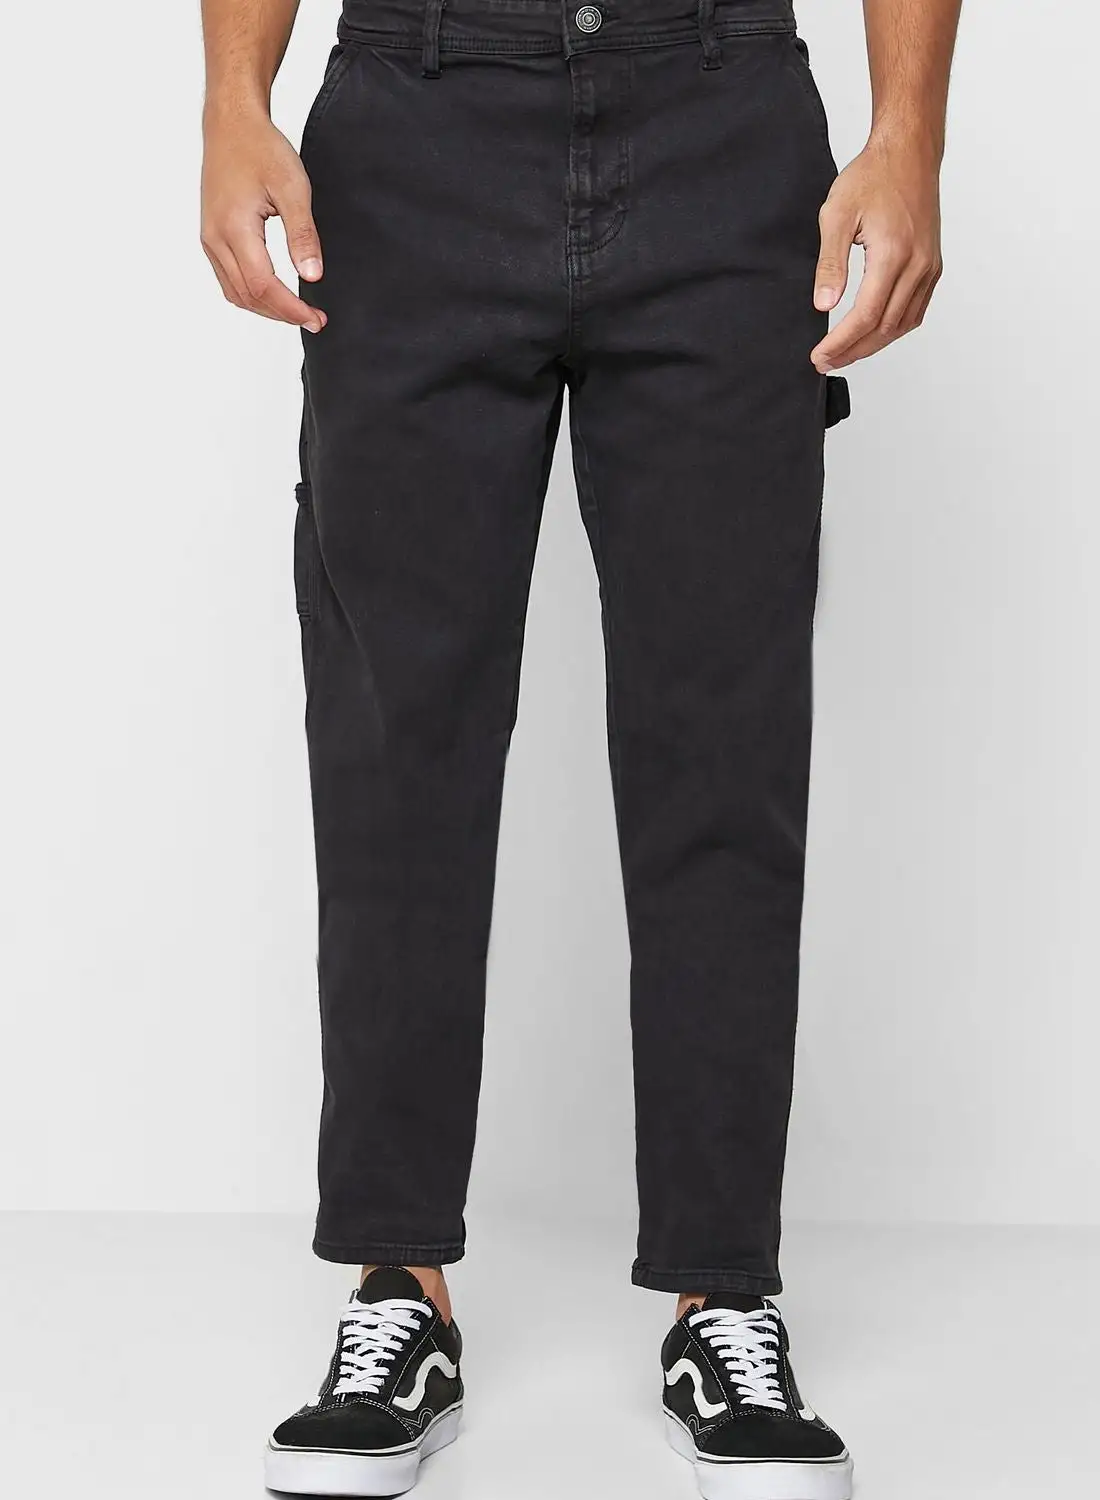 Cotton On Mid Wash Relaxed Fit Jeans